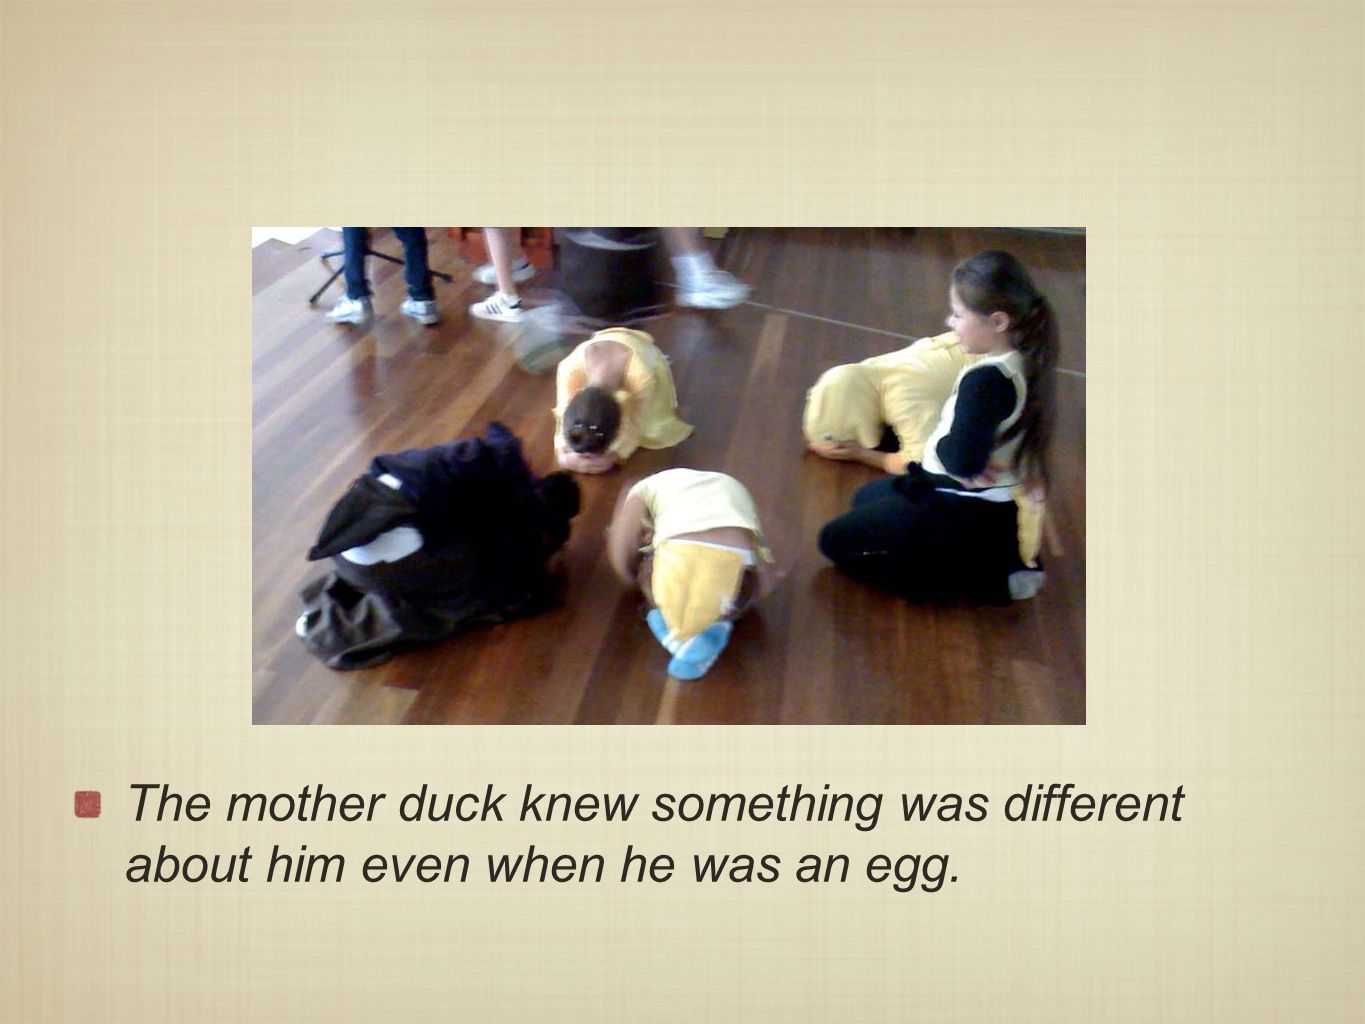 x The mother duck knew something was different about him even when he was an egg.